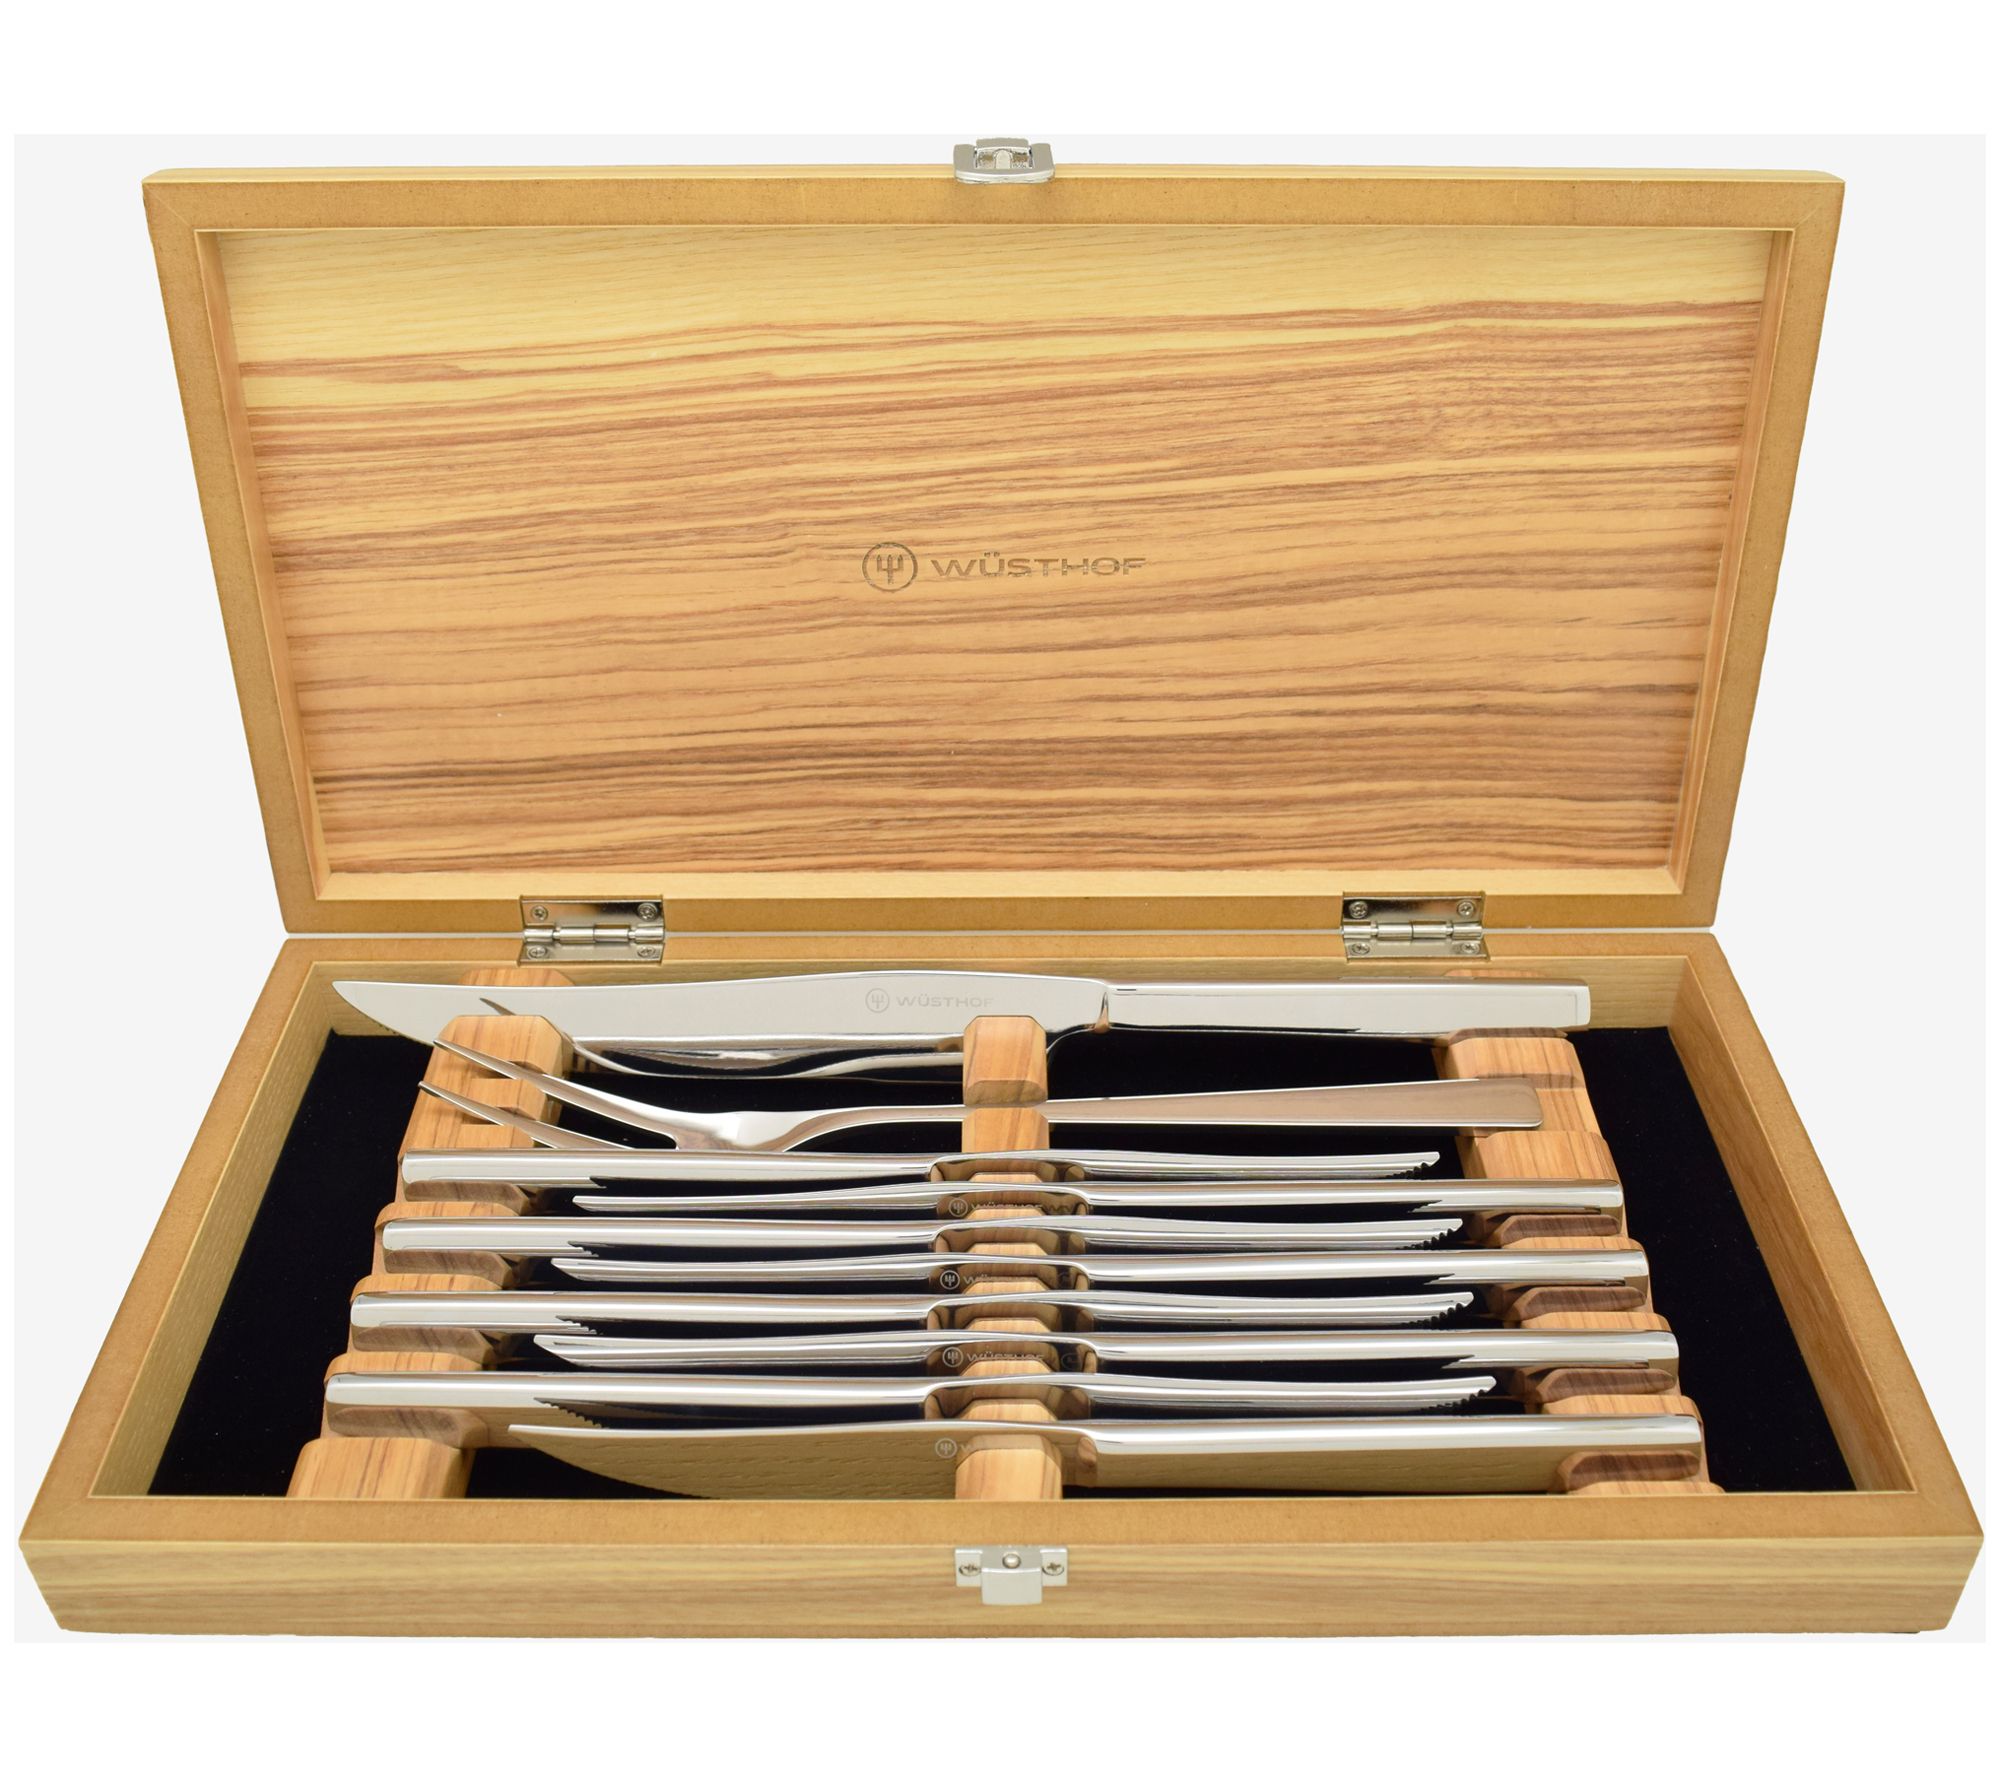  Wusthof Classic Steak Knife Set with Wood Case (6 Piece): Home  & Kitchen